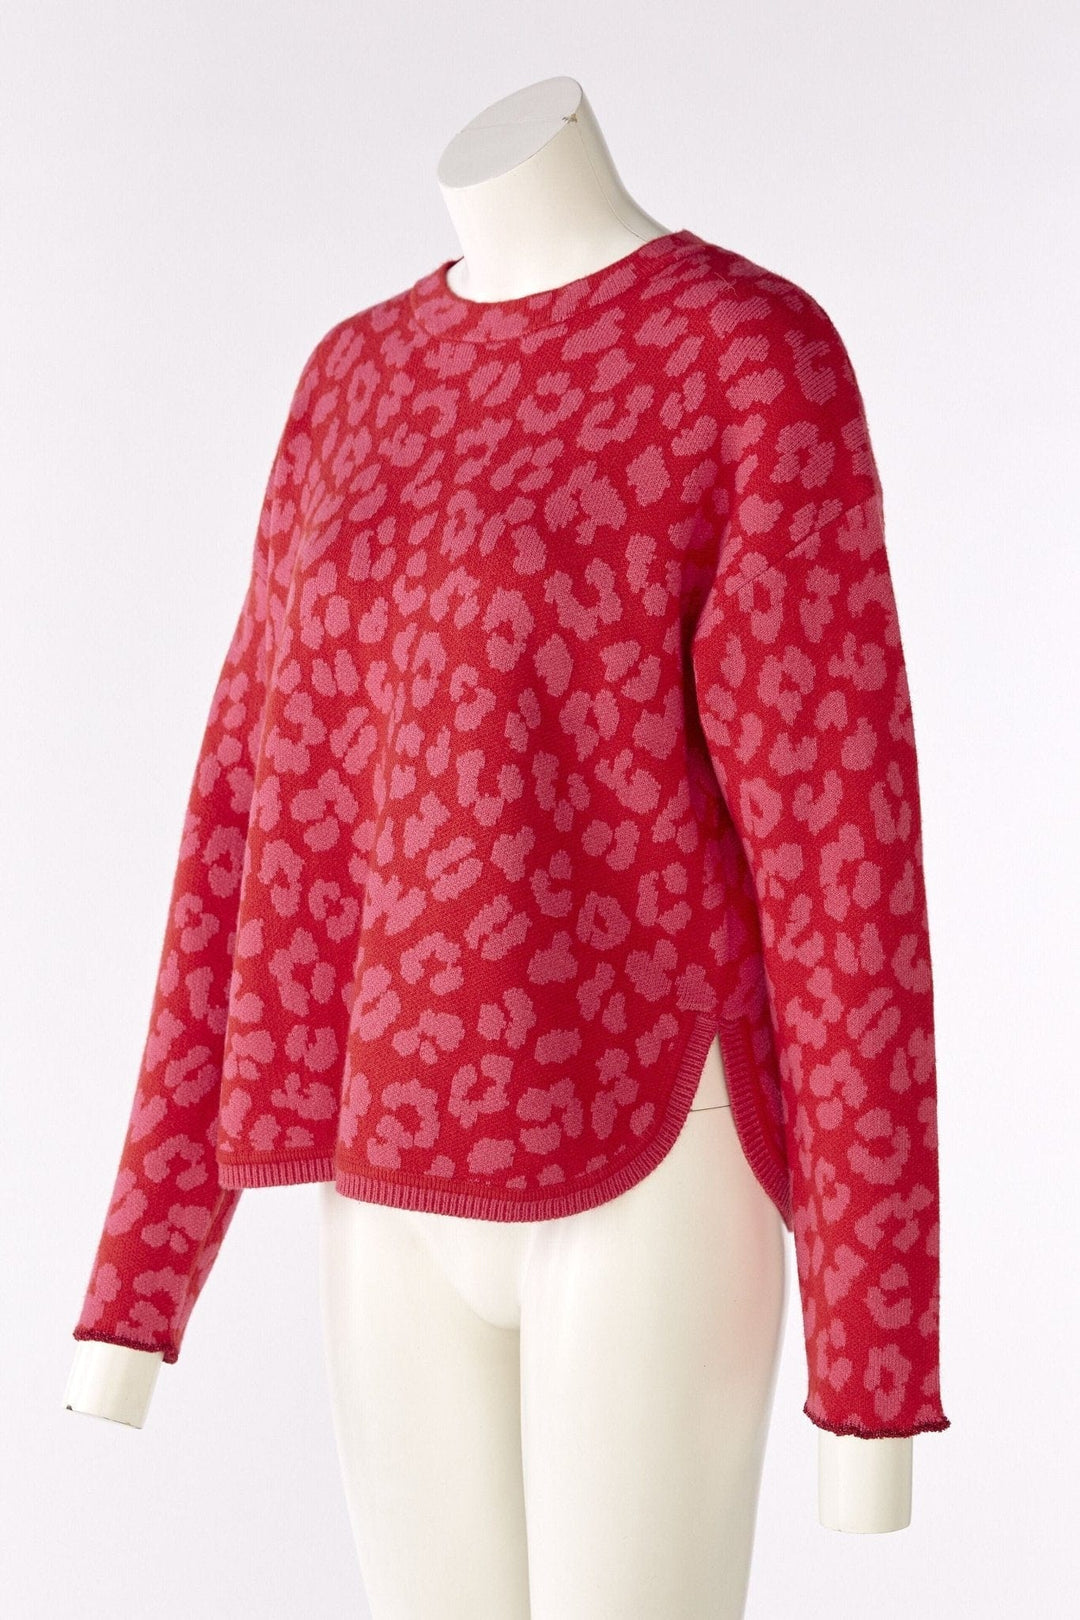 Oui Animal Print Knitted Jumper In Red & Coral - Crabtree Cottage